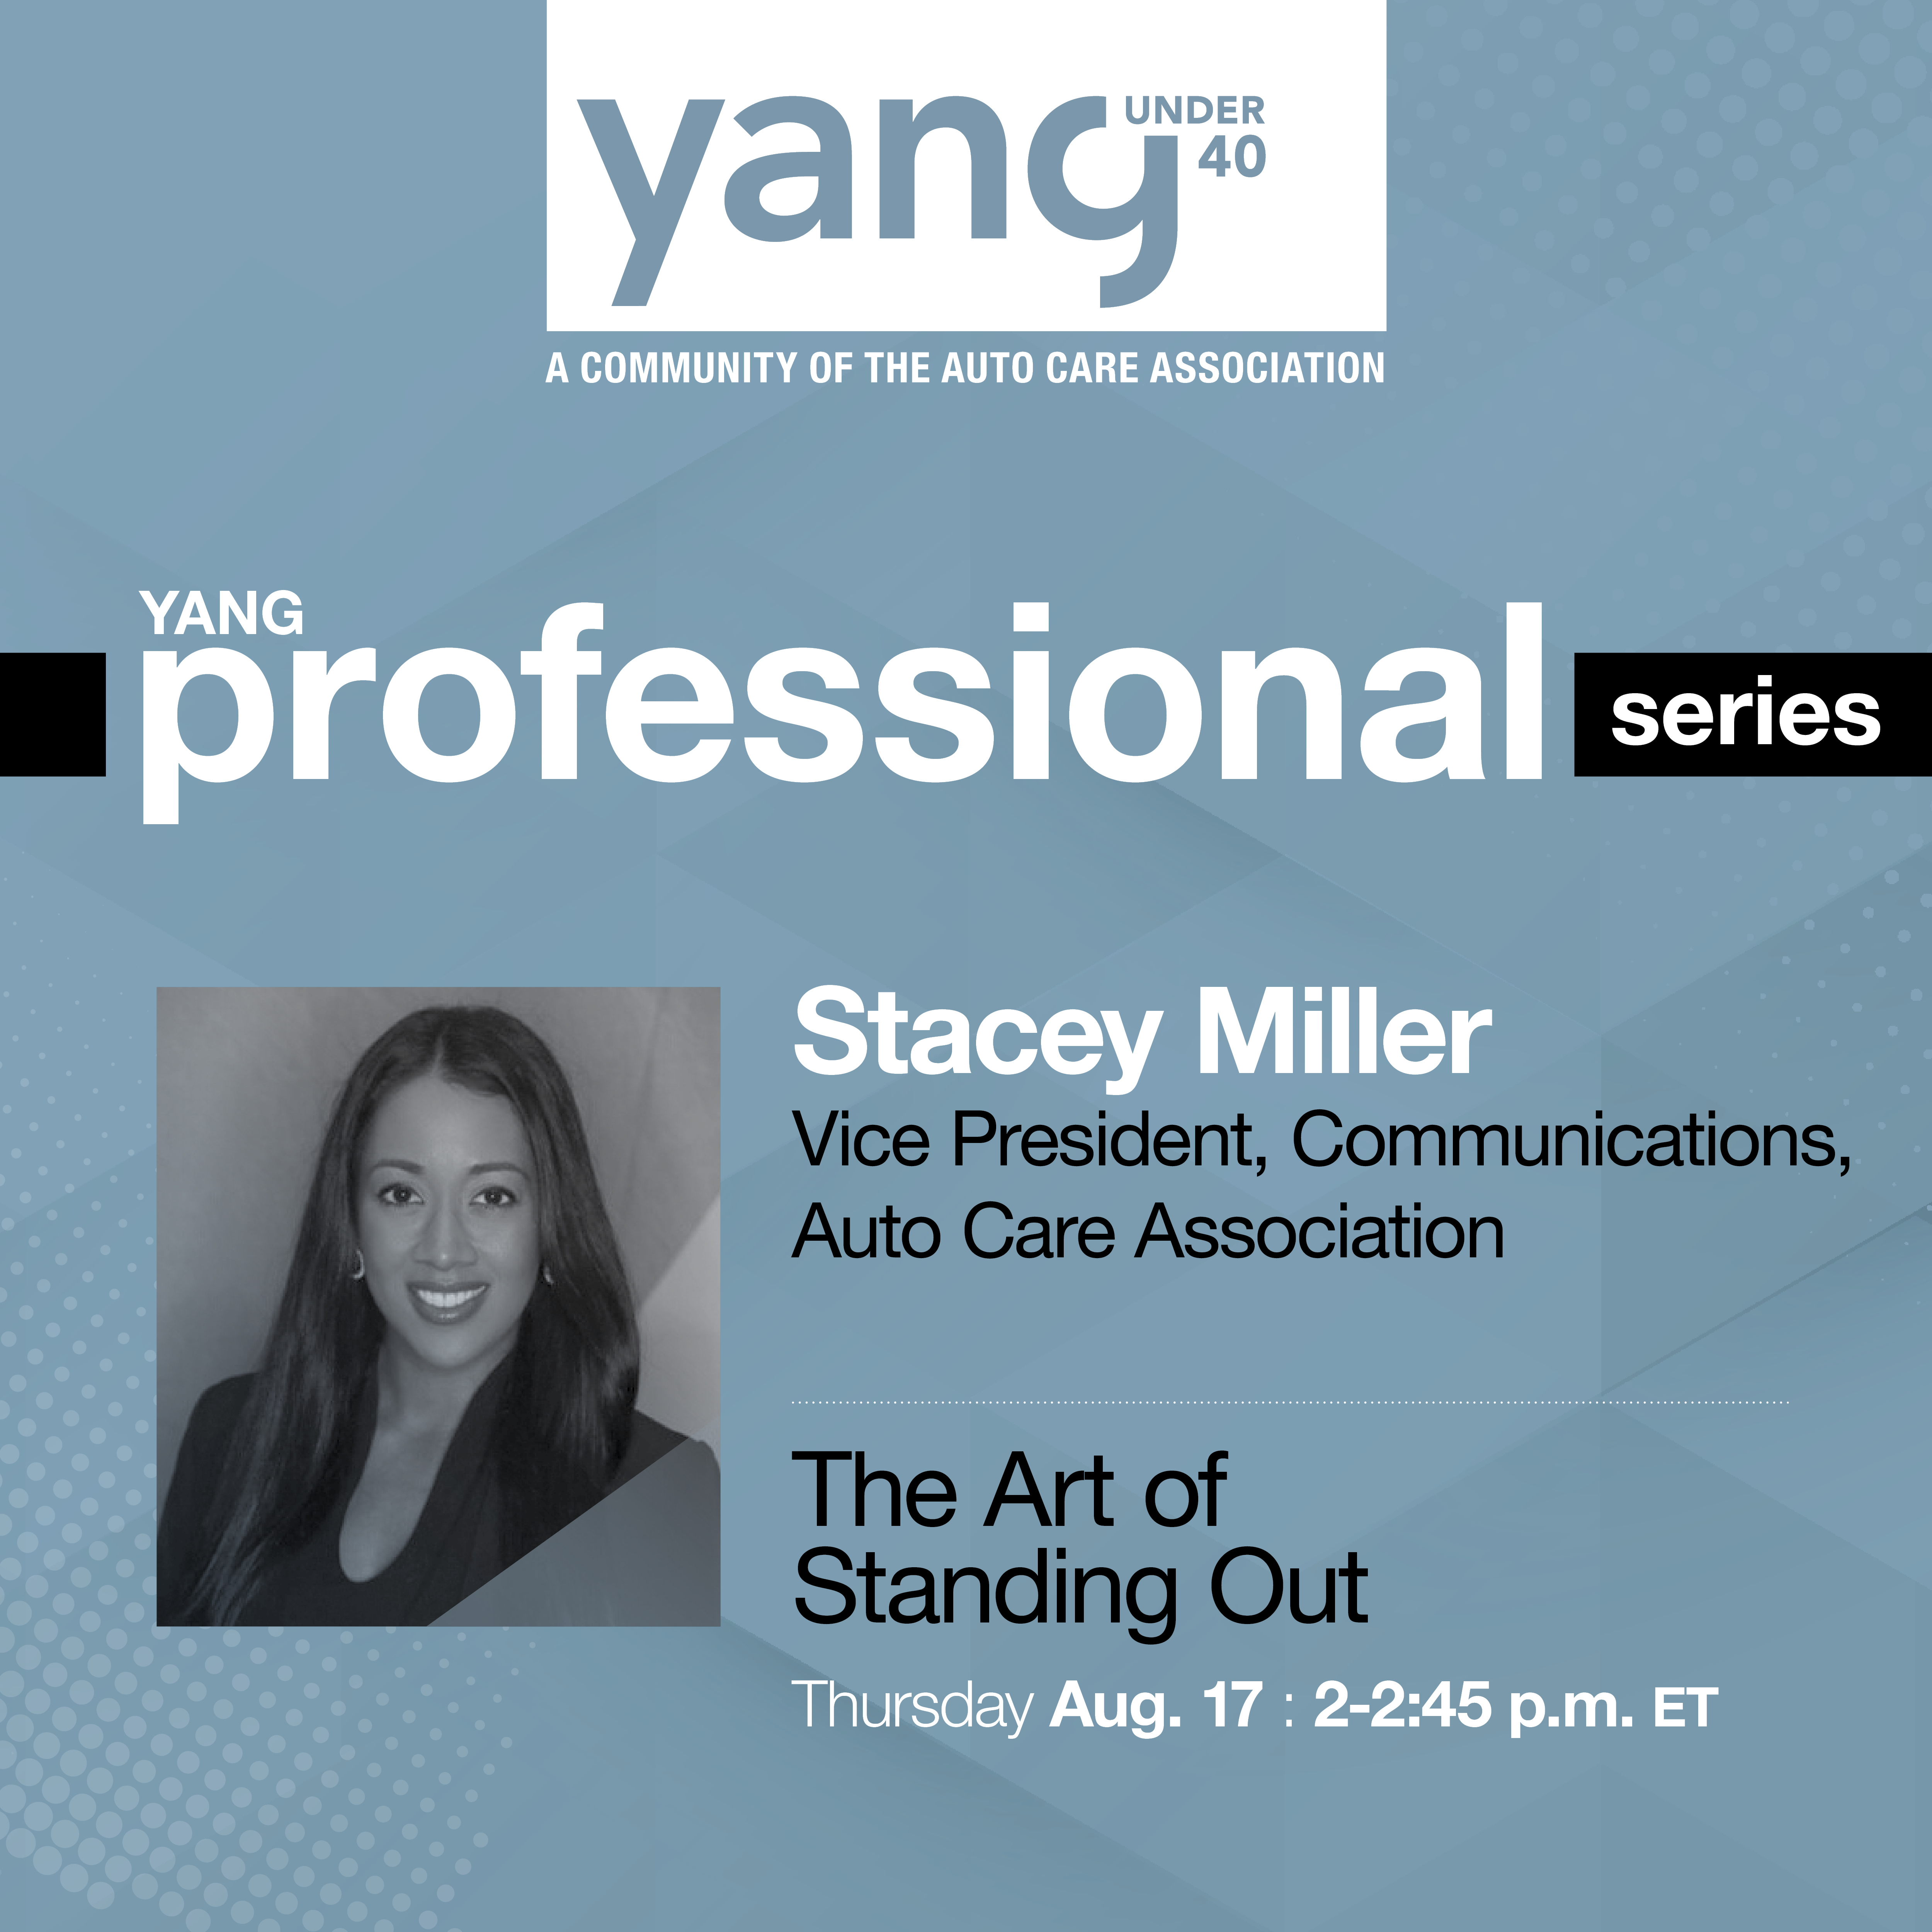 YANG Professional Series featuring Stacey Miller